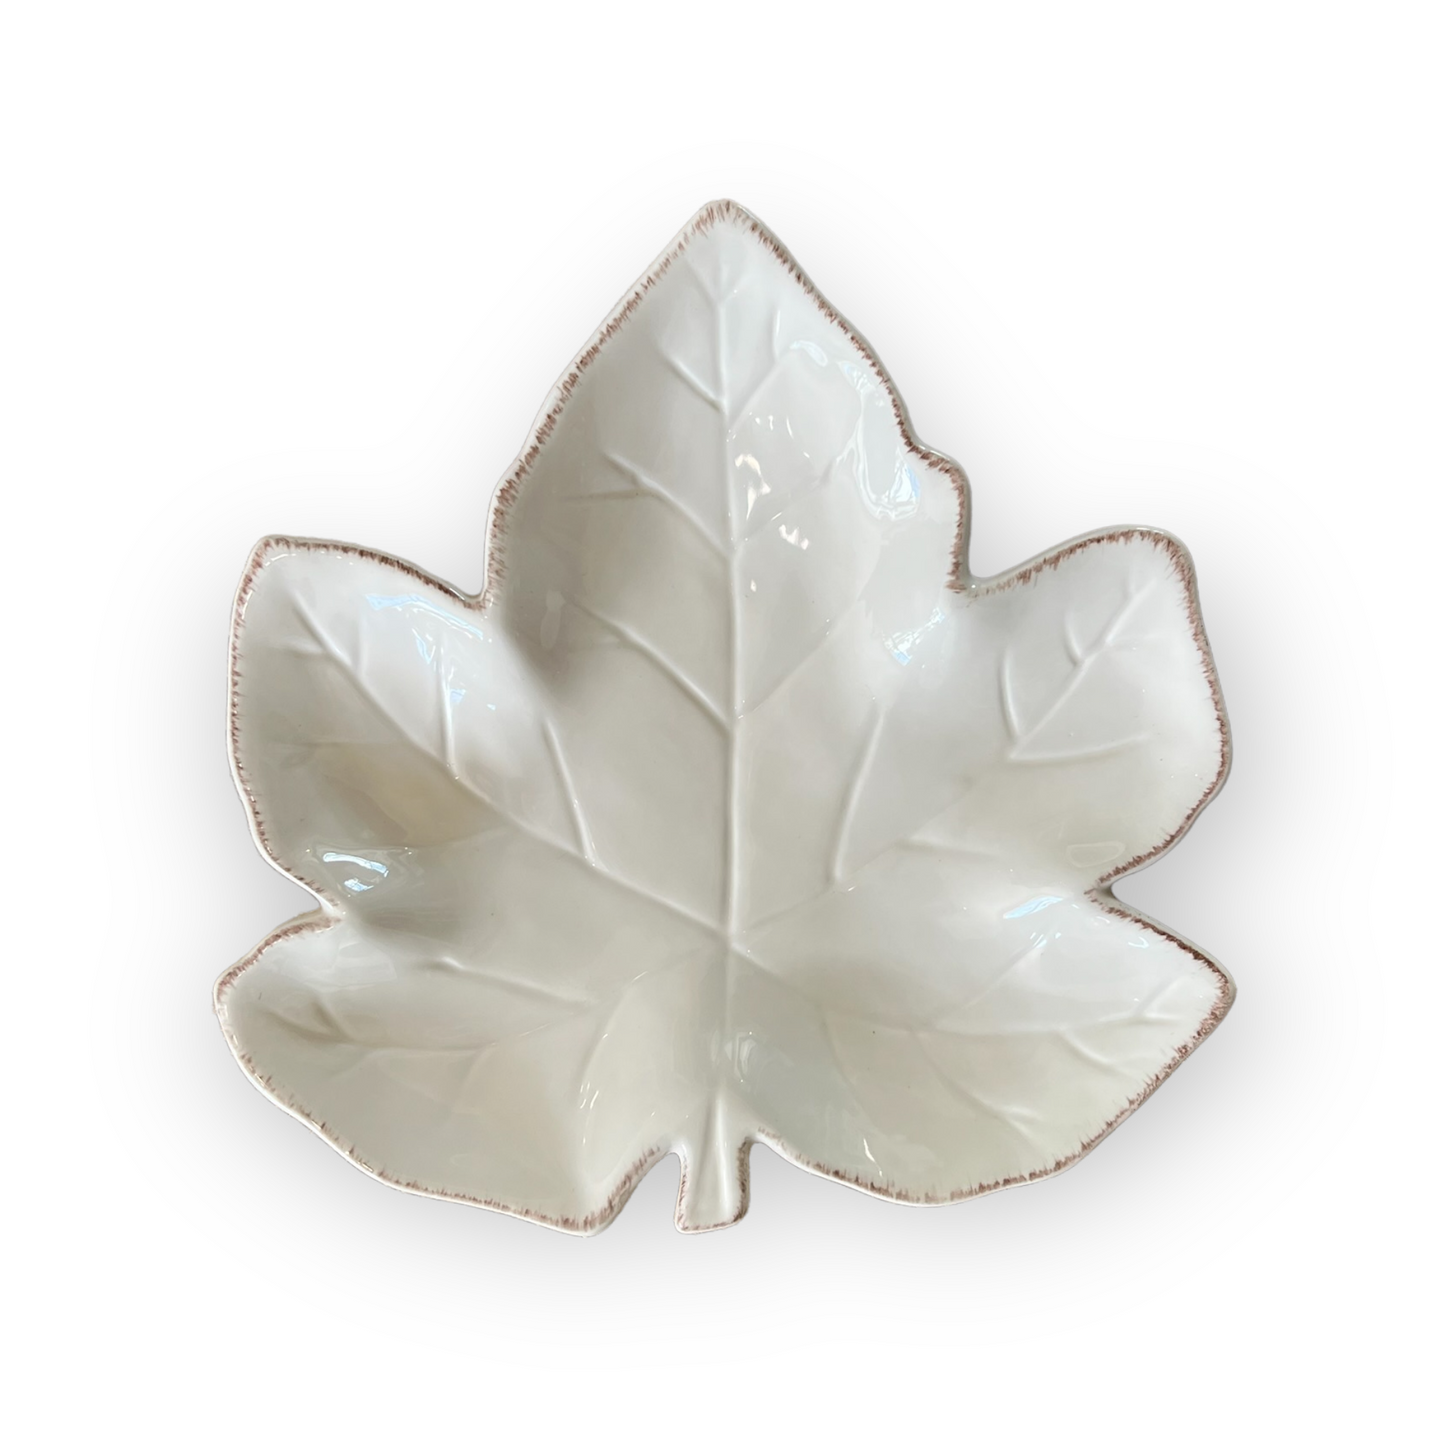 Maple Leaf Small White Serving Plate - Mikasa